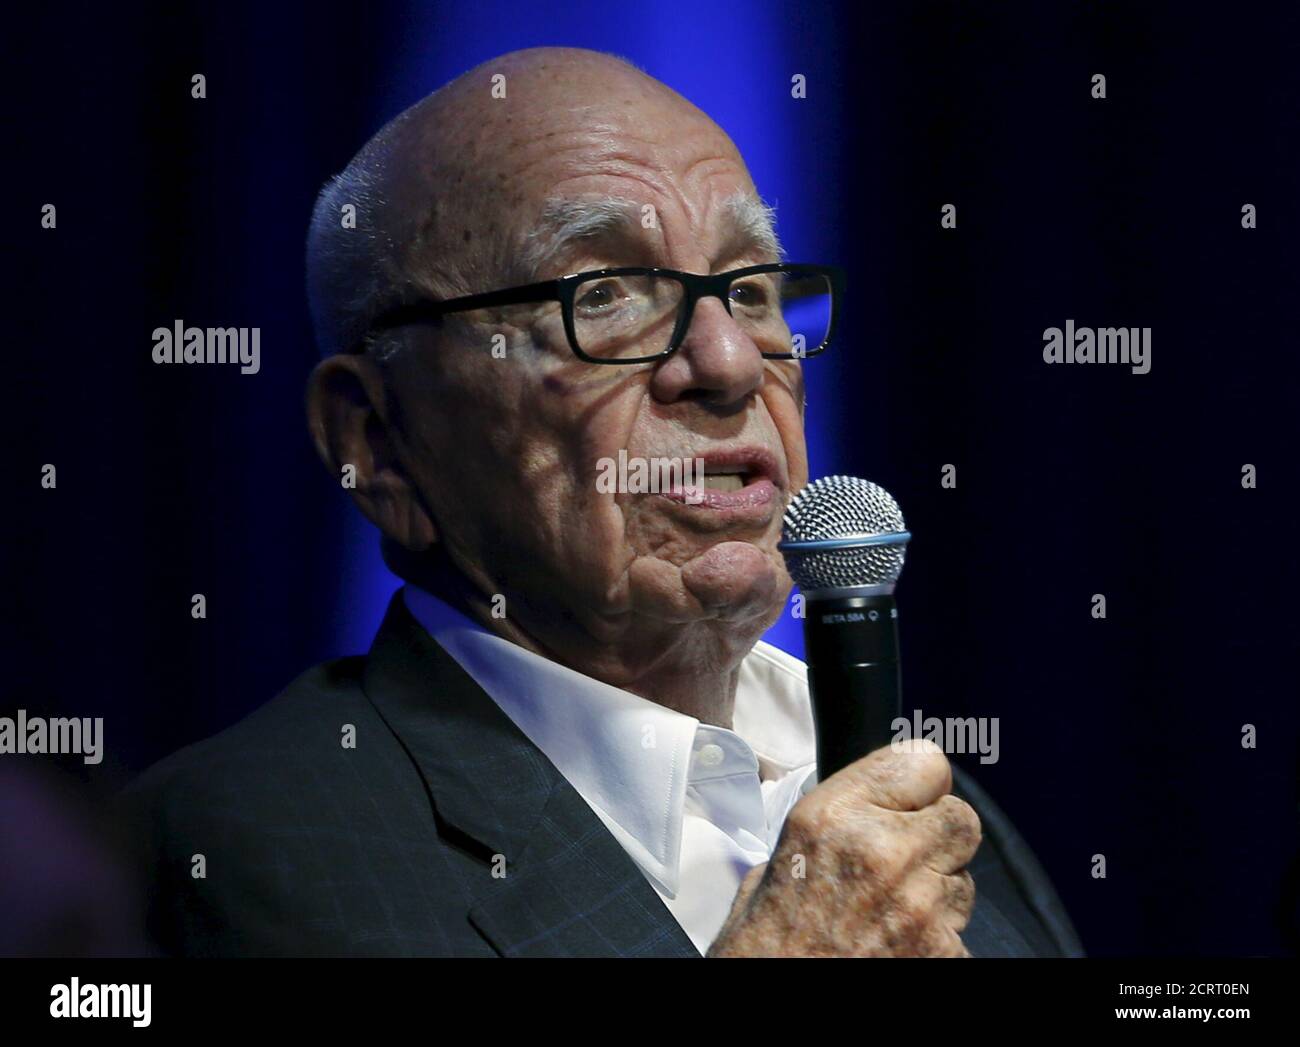 Rupert Murdoch, Executive Chairman of News Corp and 21st Century Fox, takes part as a judge during a global start up showcase at the Wall Street Journal Digital Live (WSJDLive) conference at the Montage hotel in Laguna Beach, California, October 20, 2015. REUTERS/Mike Blake Stock Photo